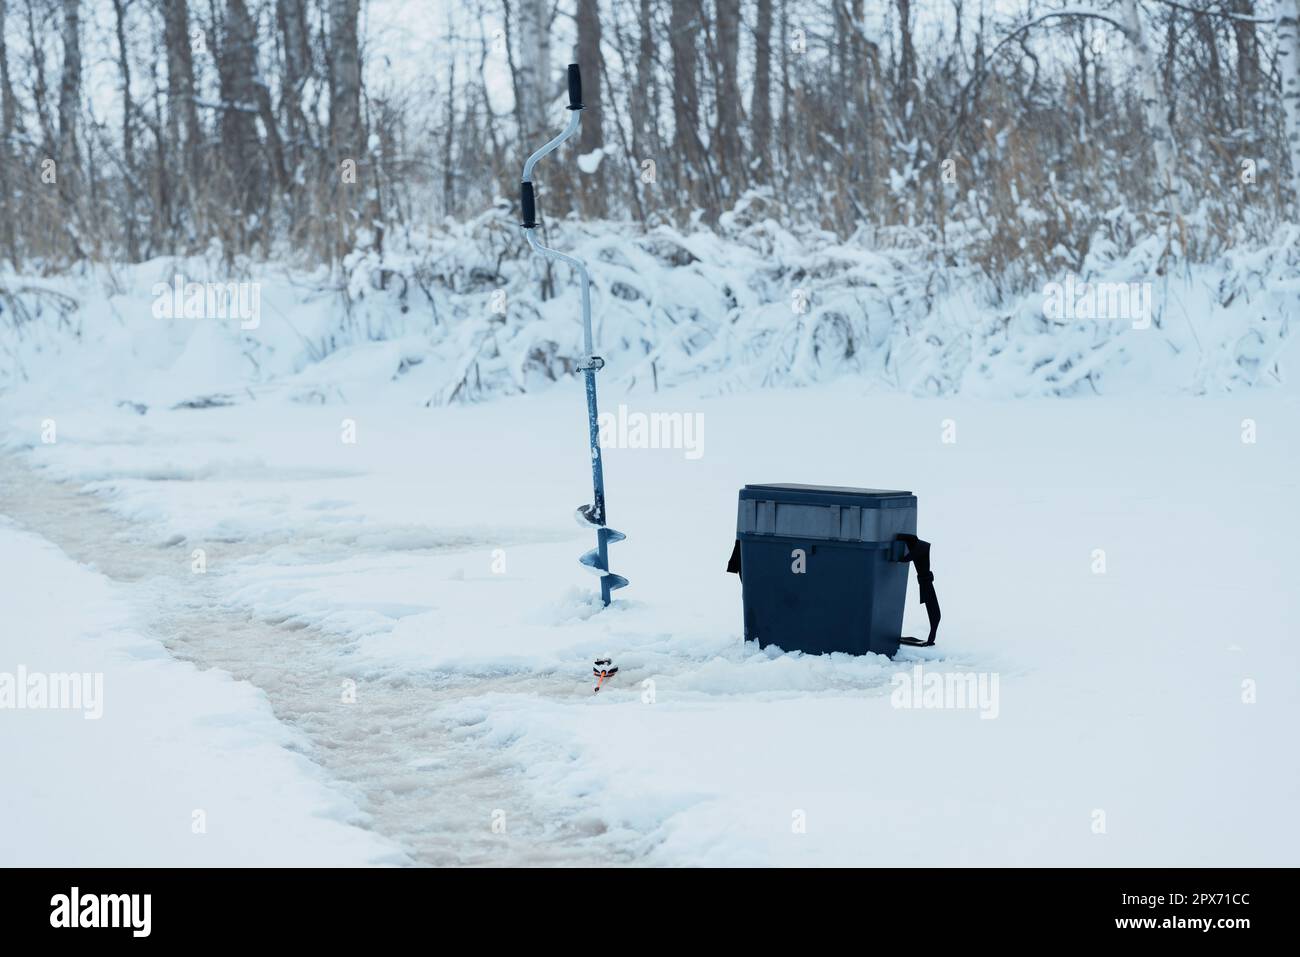 https://c8.alamy.com/comp/2PX71CC/fishing-box-fishing-rod-and-ice-drill-near-hole-on-ice-in-winter-2PX71CC.jpg